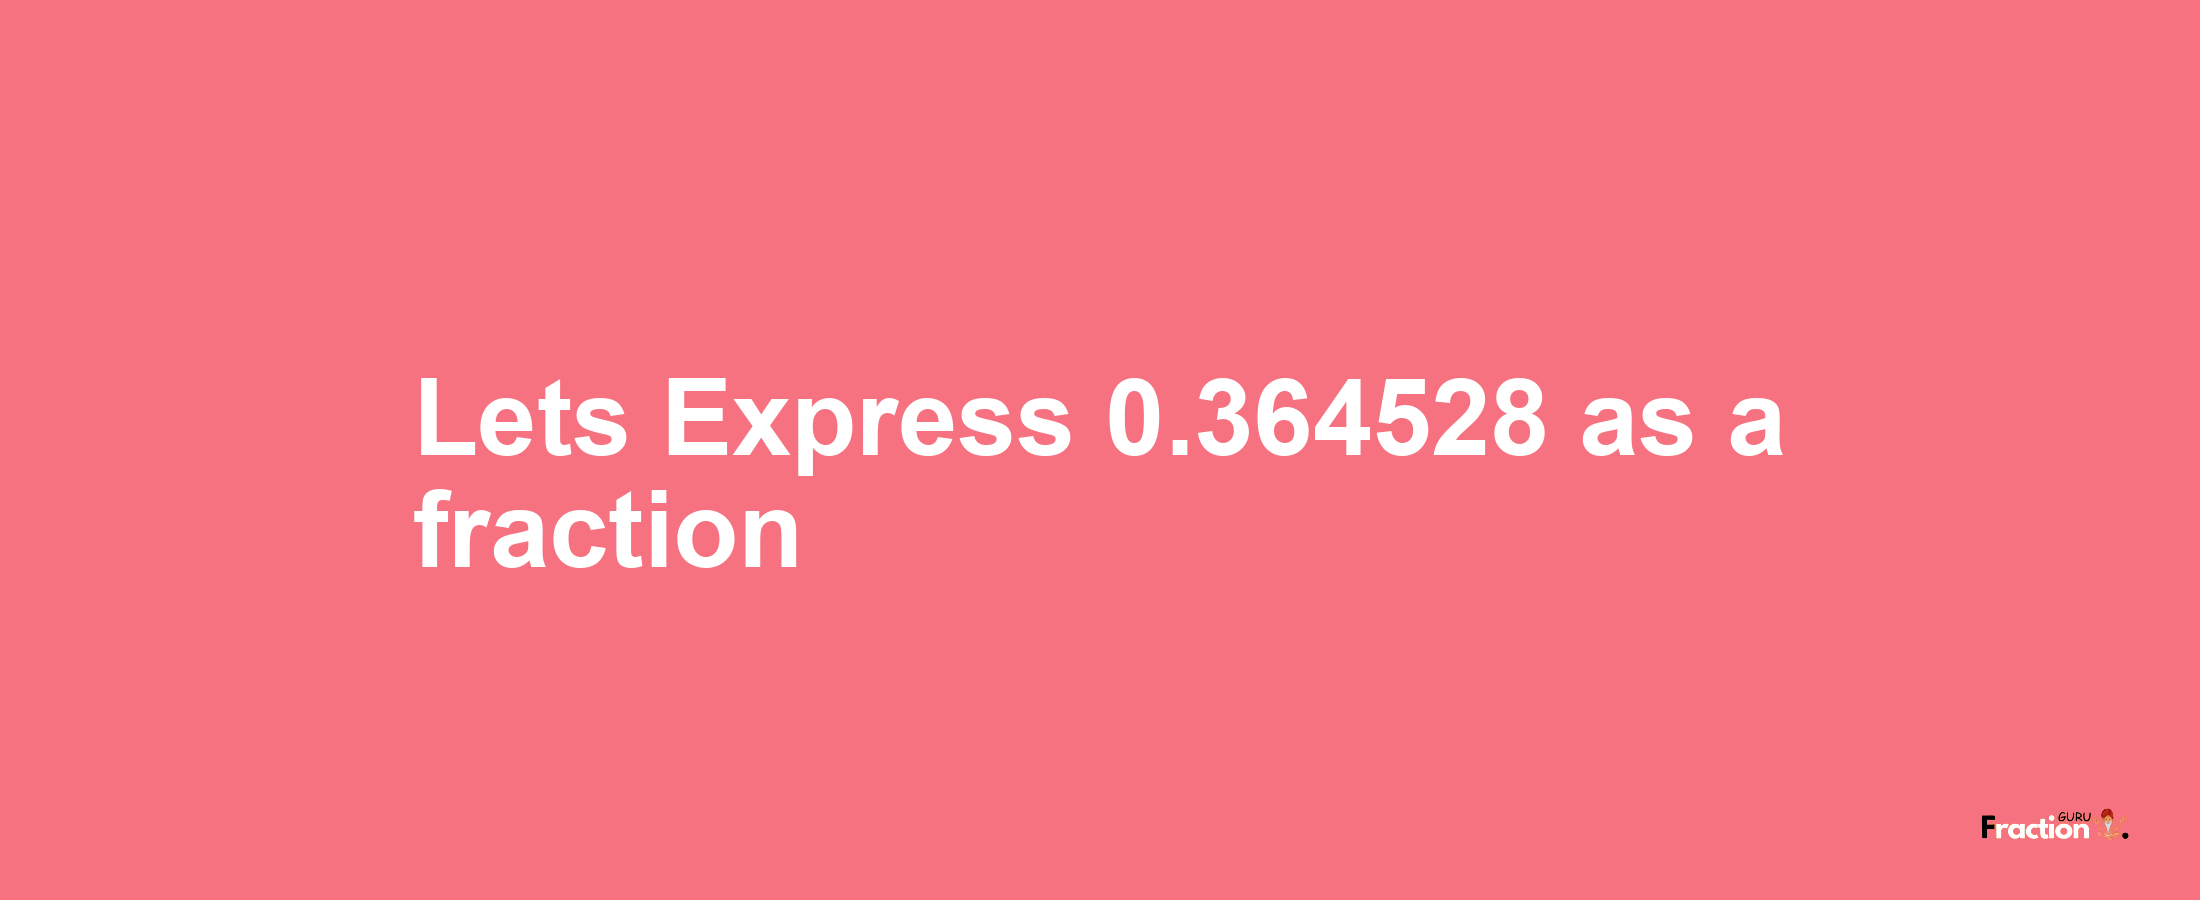 Lets Express 0.364528 as afraction